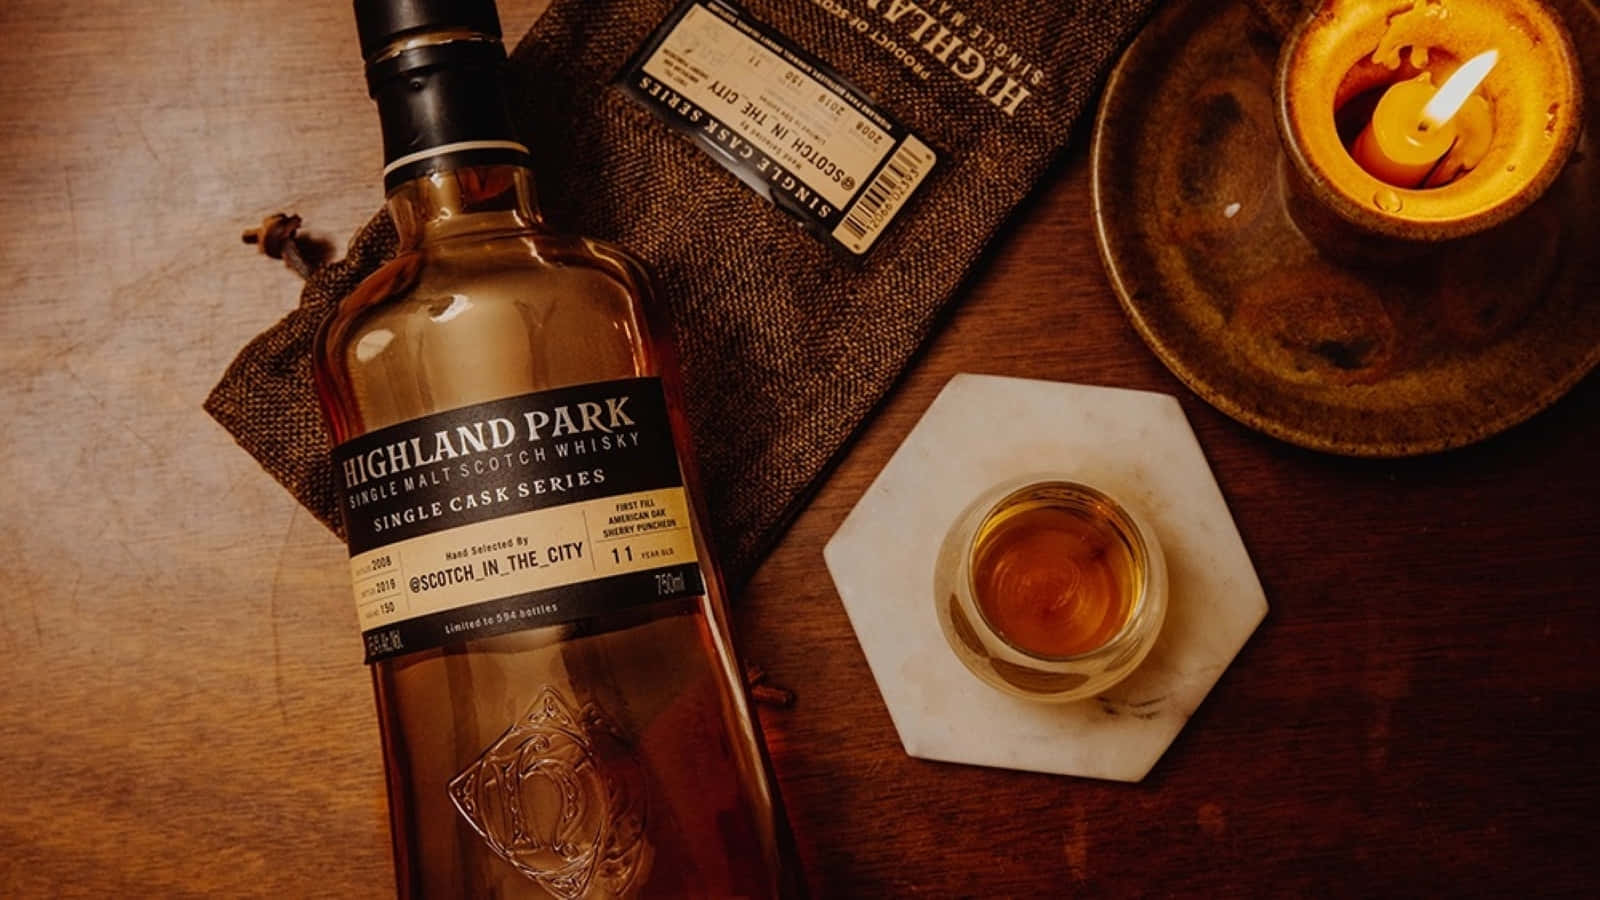 Candle Light Table With Highland Park Whiskey Wallpaper